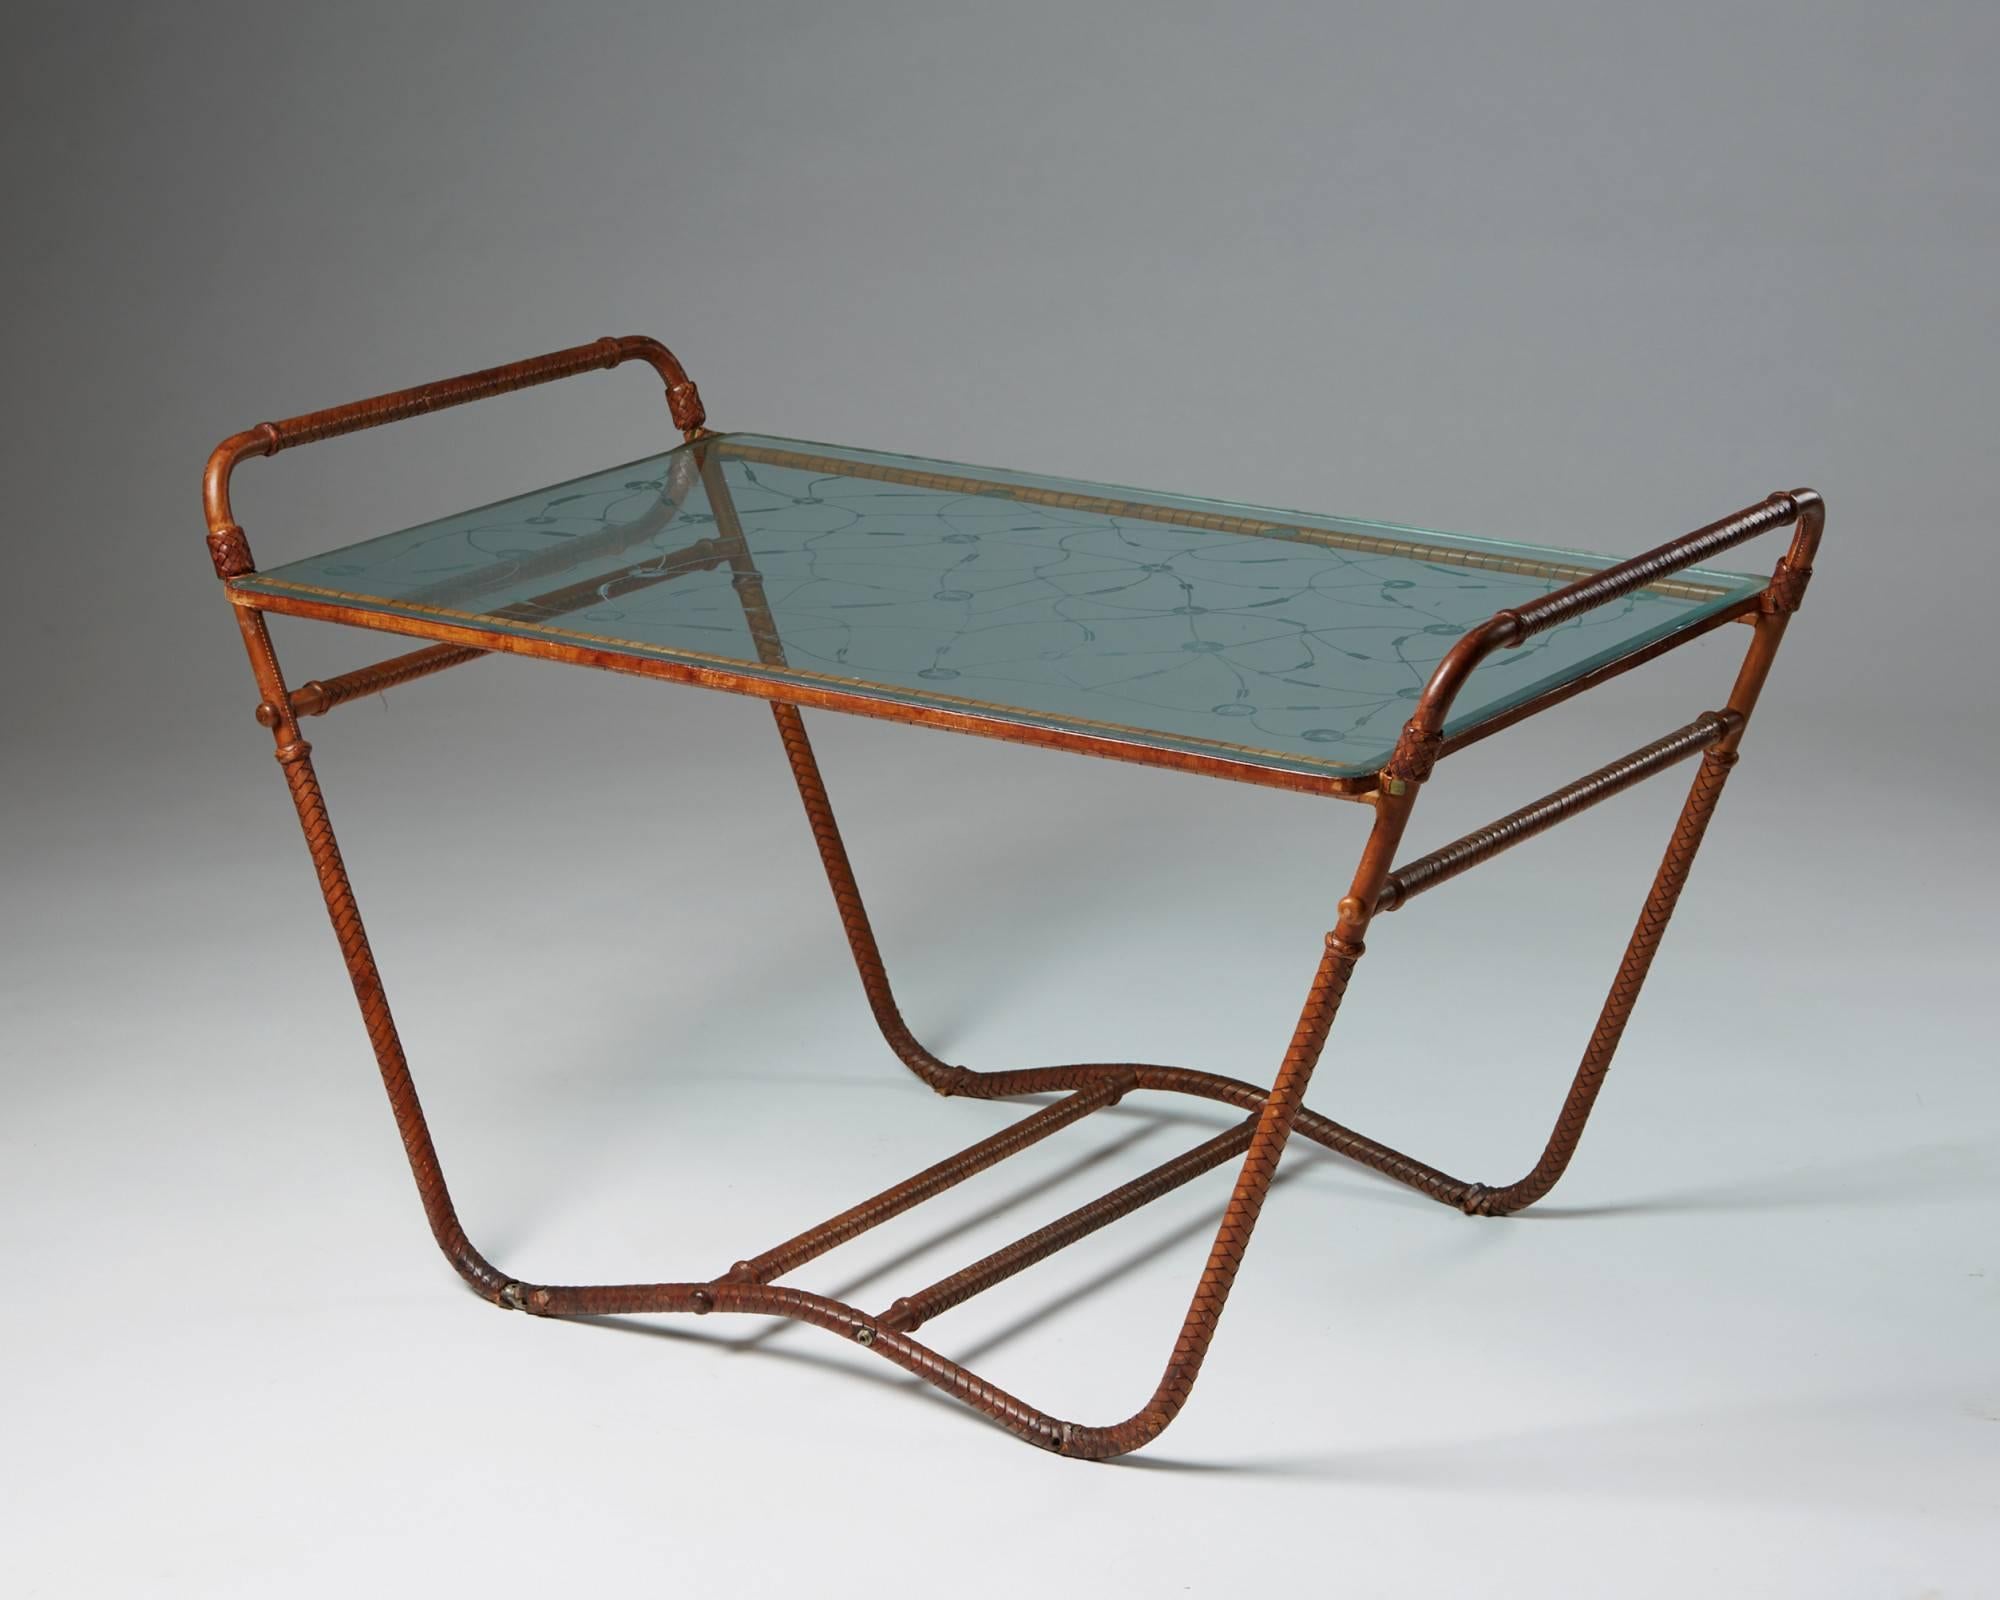 Occasional table, anonymous, Sweden, 1940s. Steel, leather and glass.

Measures: H: 58 cm/ 22 1/2''
L: 101 cm/ 39 1/2''
D: 60 cm/ 23 3/4''.
 